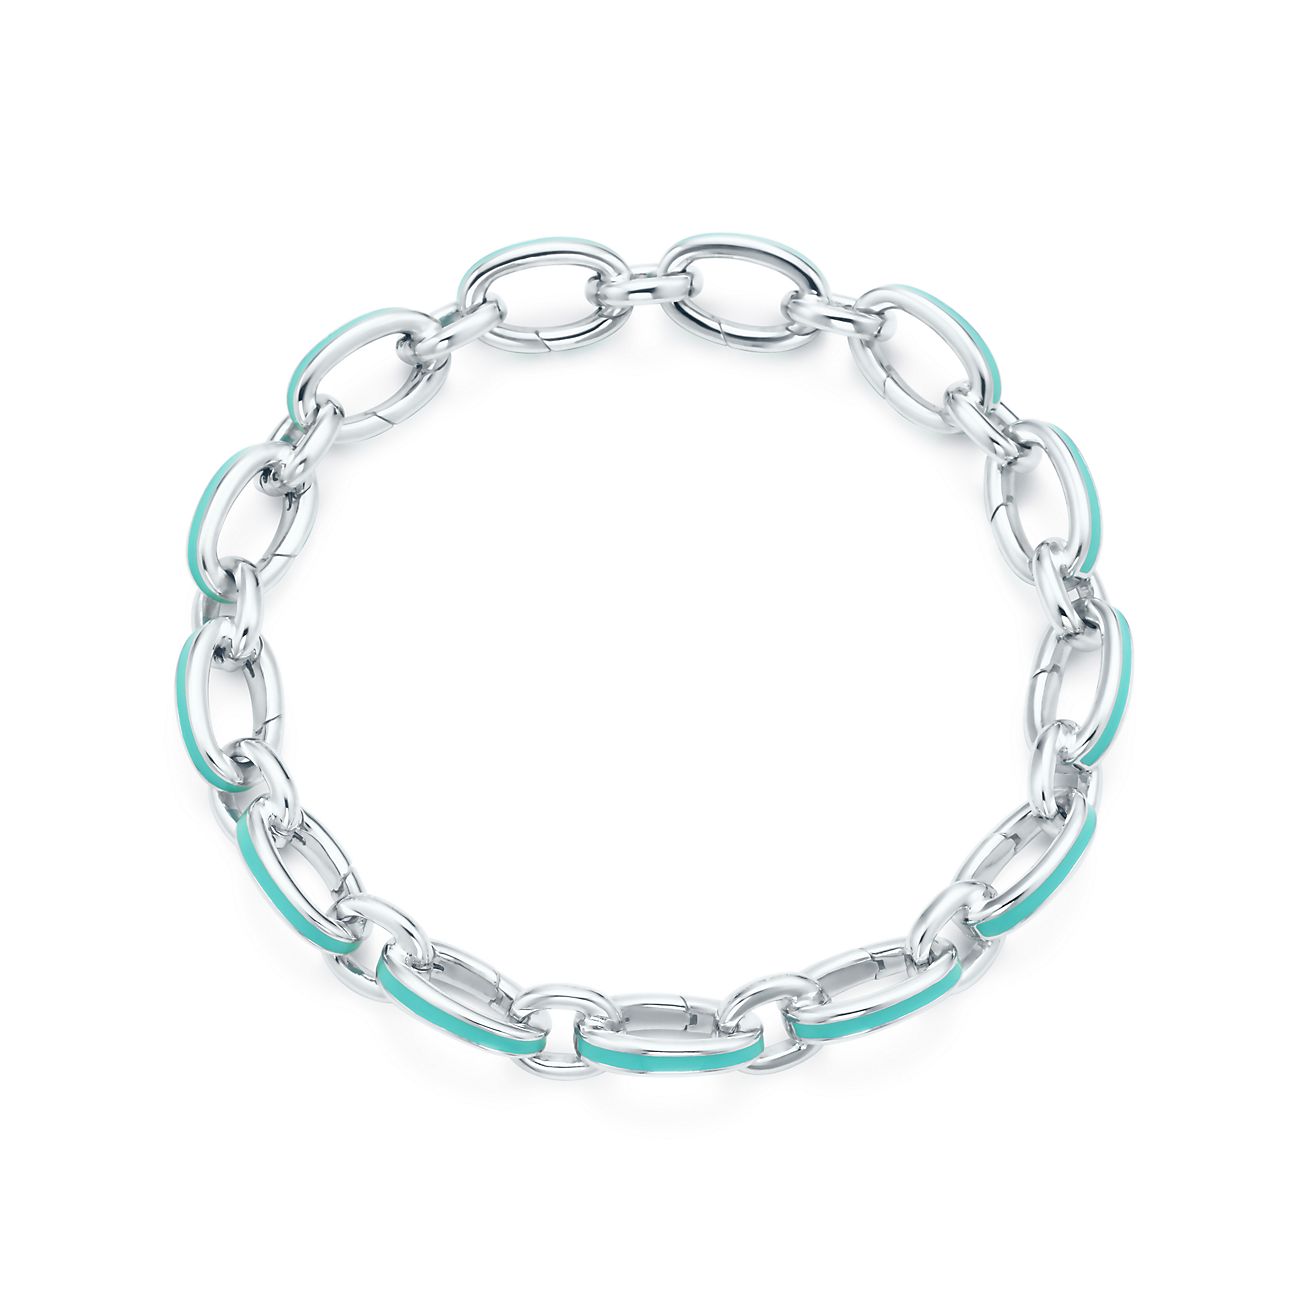 Tiffany Blue® clasping link bracelet in 